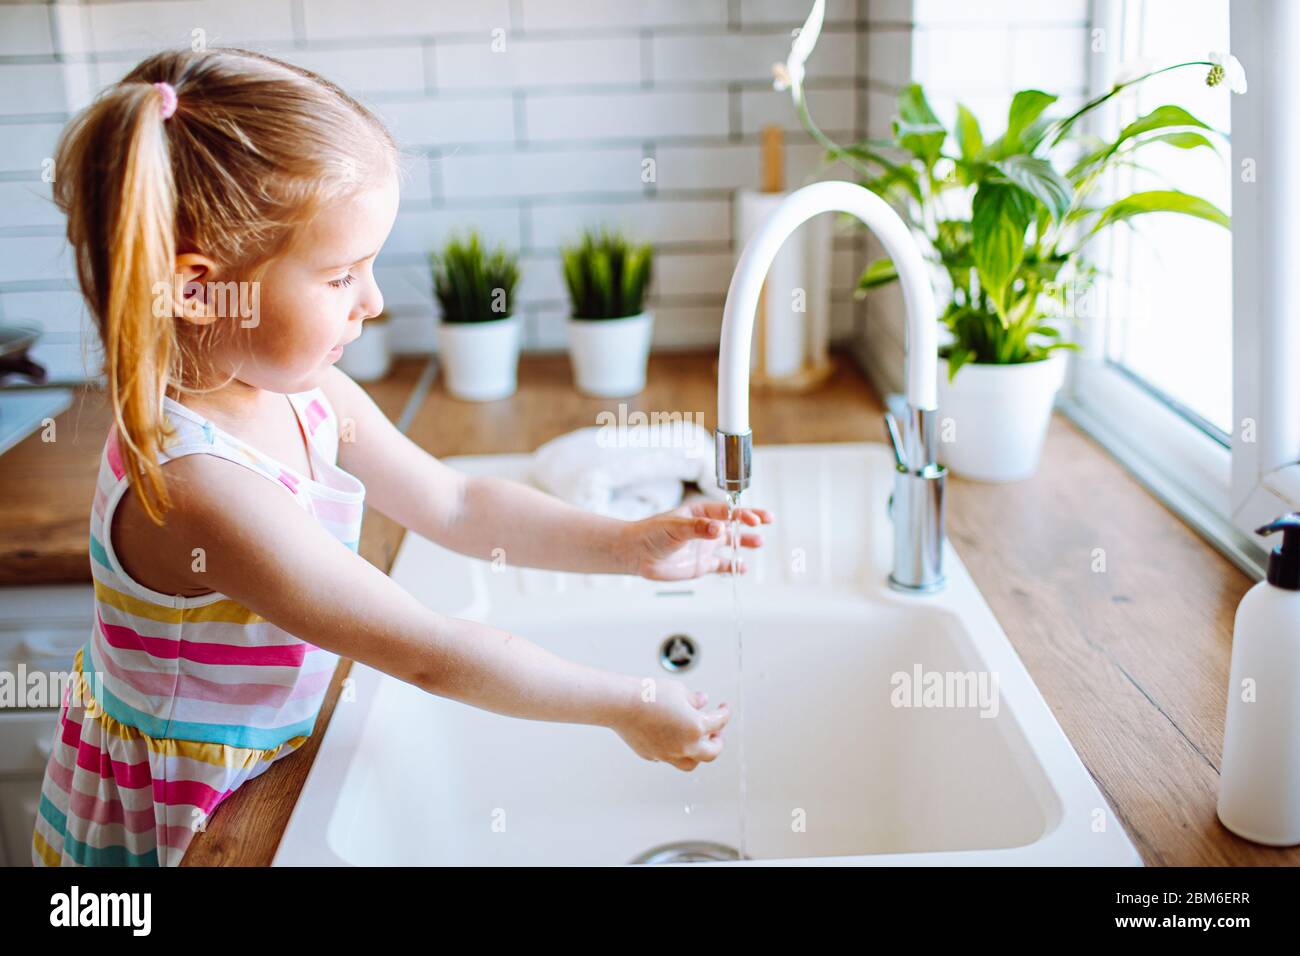 Blonde toddler girl washing hands in the light kitchen before eating. Hygiene and healthcare concept Stock Photo